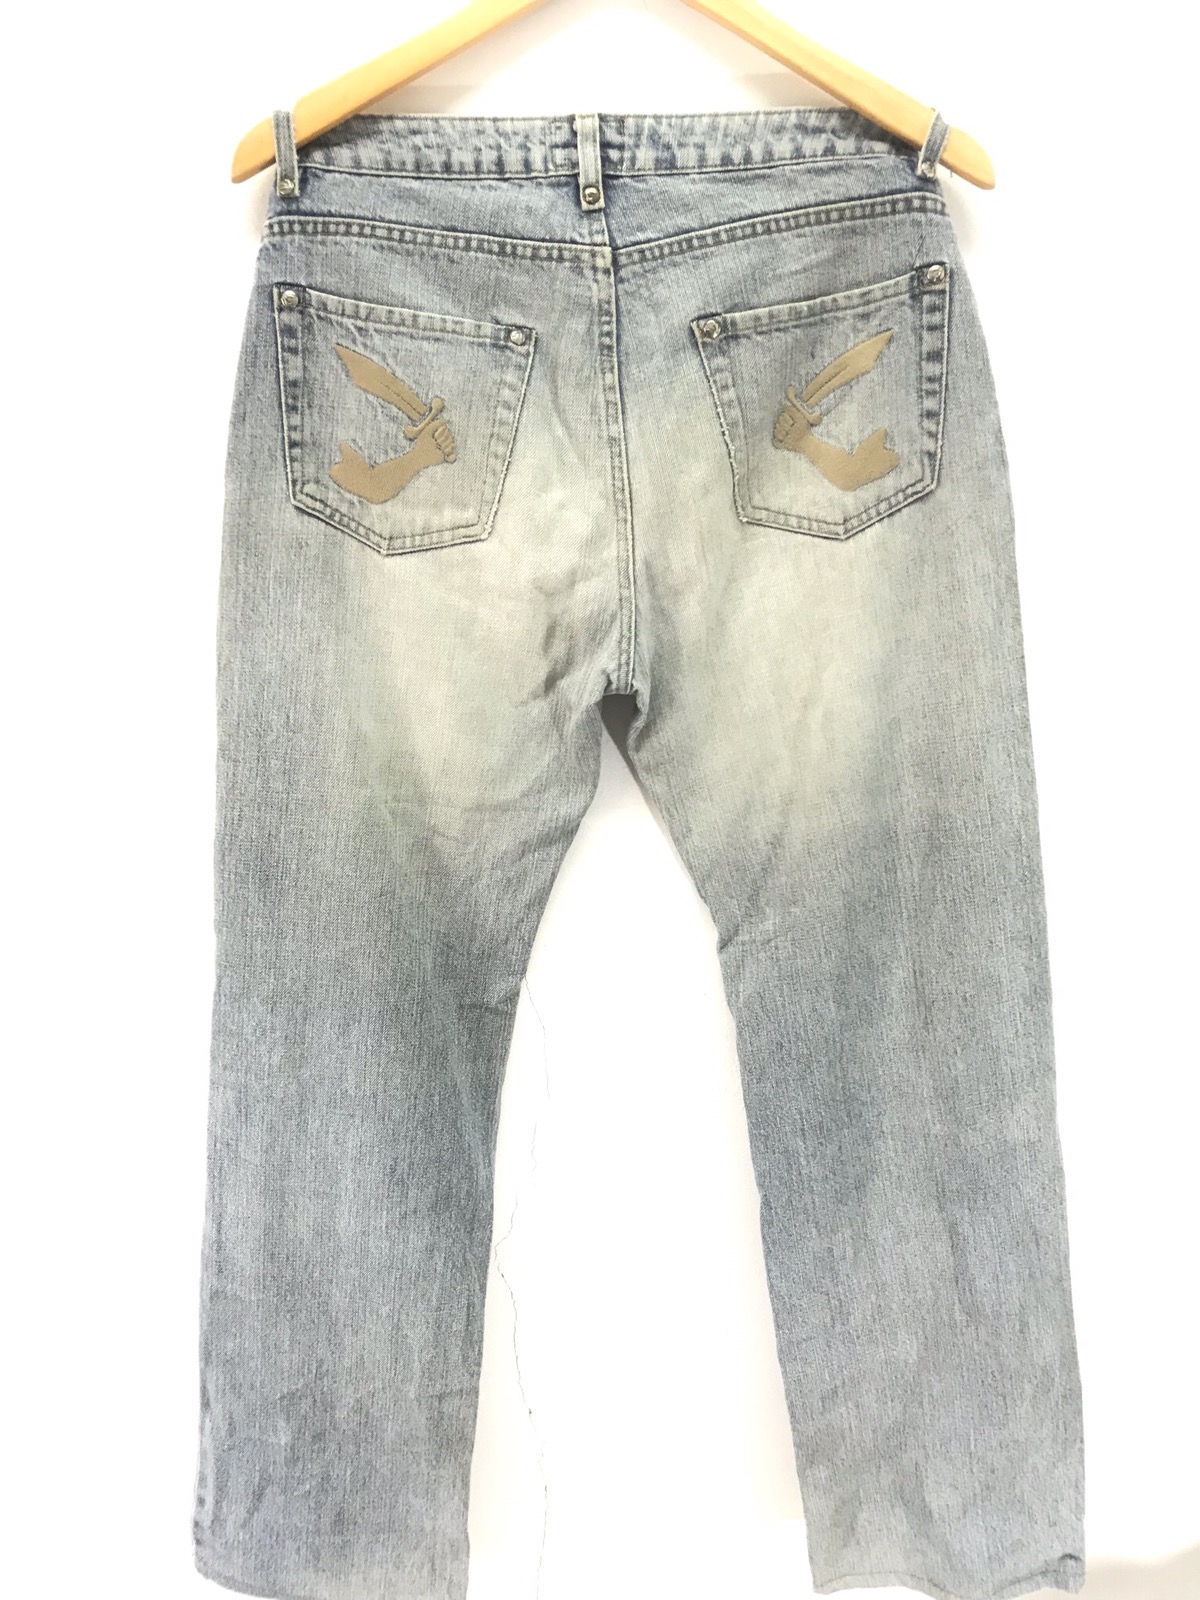 🔥Vivienne Westwood Anglomania Faded Session Jean - 1